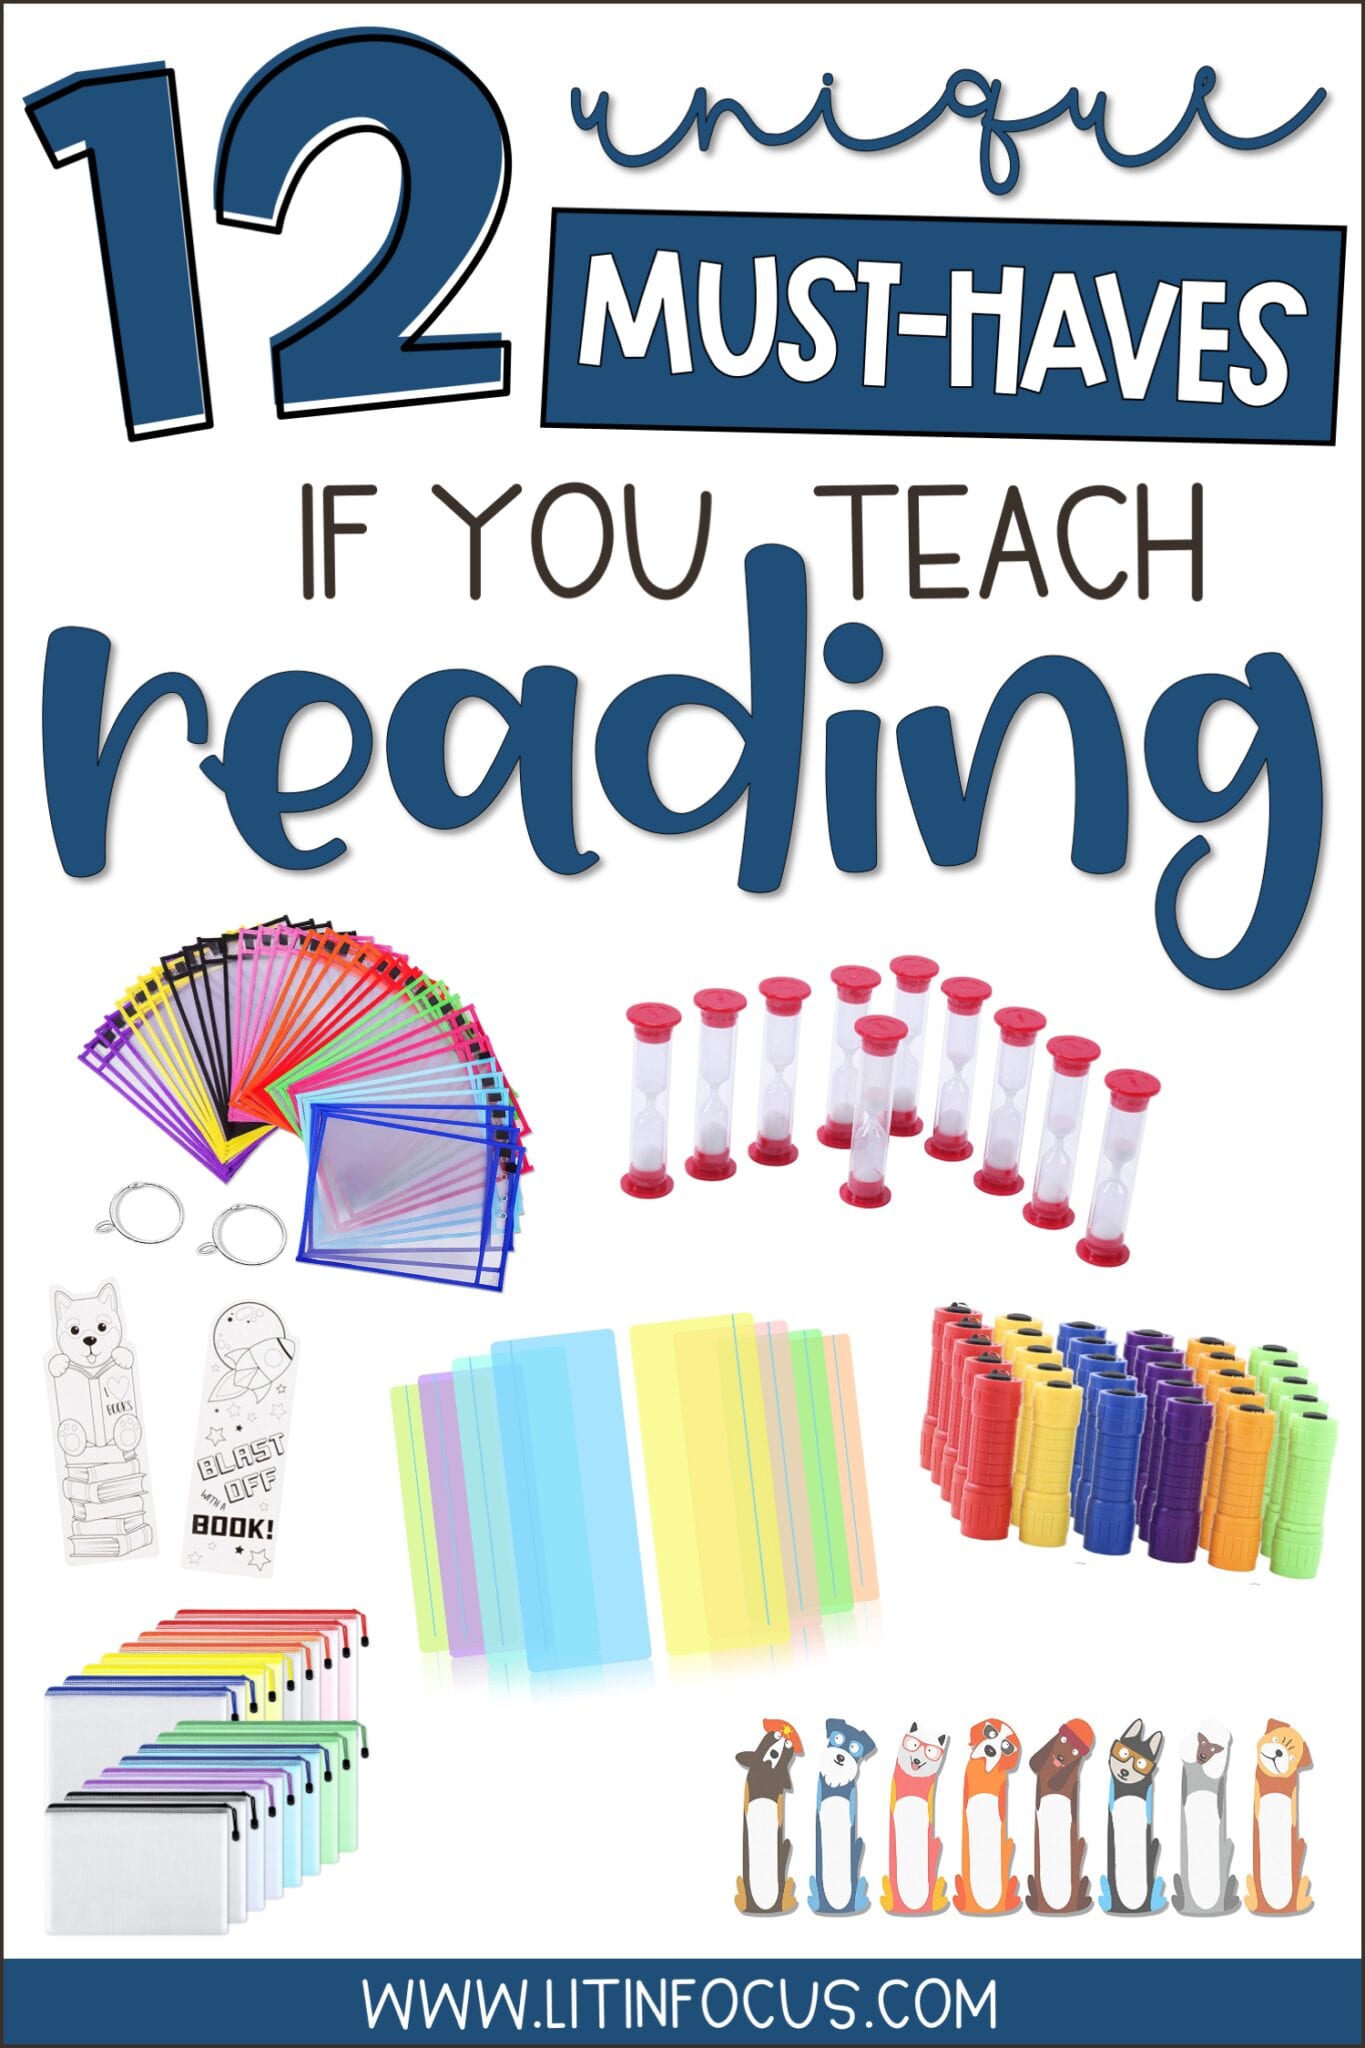 18 Classroom Supplies for Language Arts and Reading Teachers